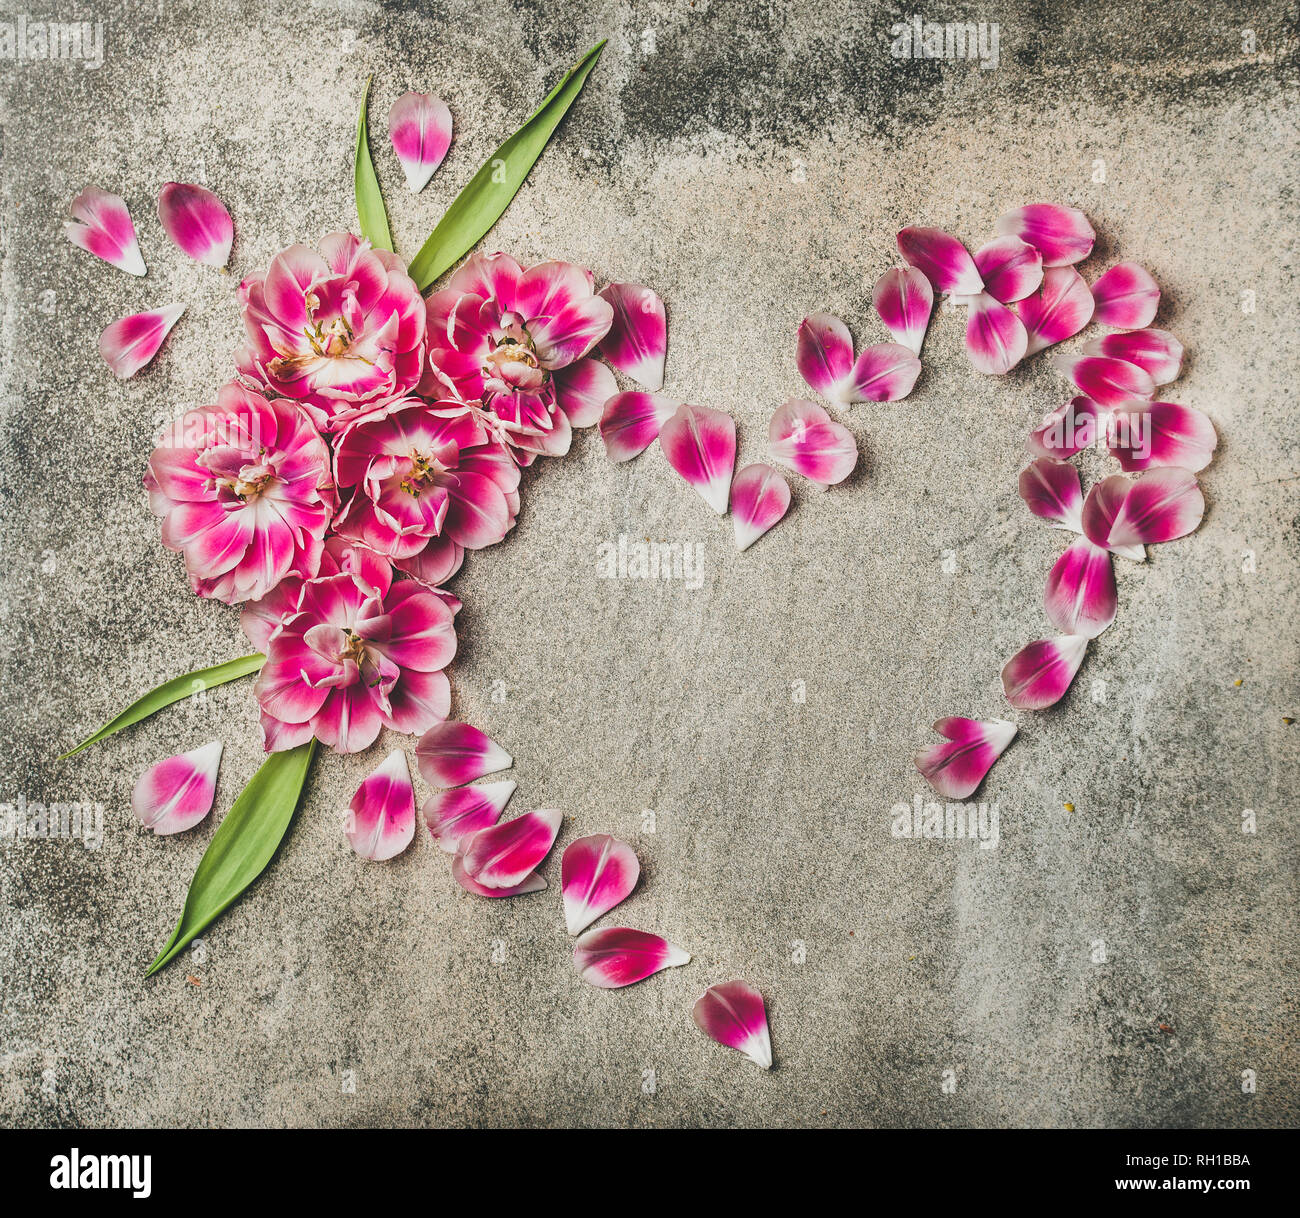 Heart shape frame made of pink tulip flower petals Stock Photo - Alamy